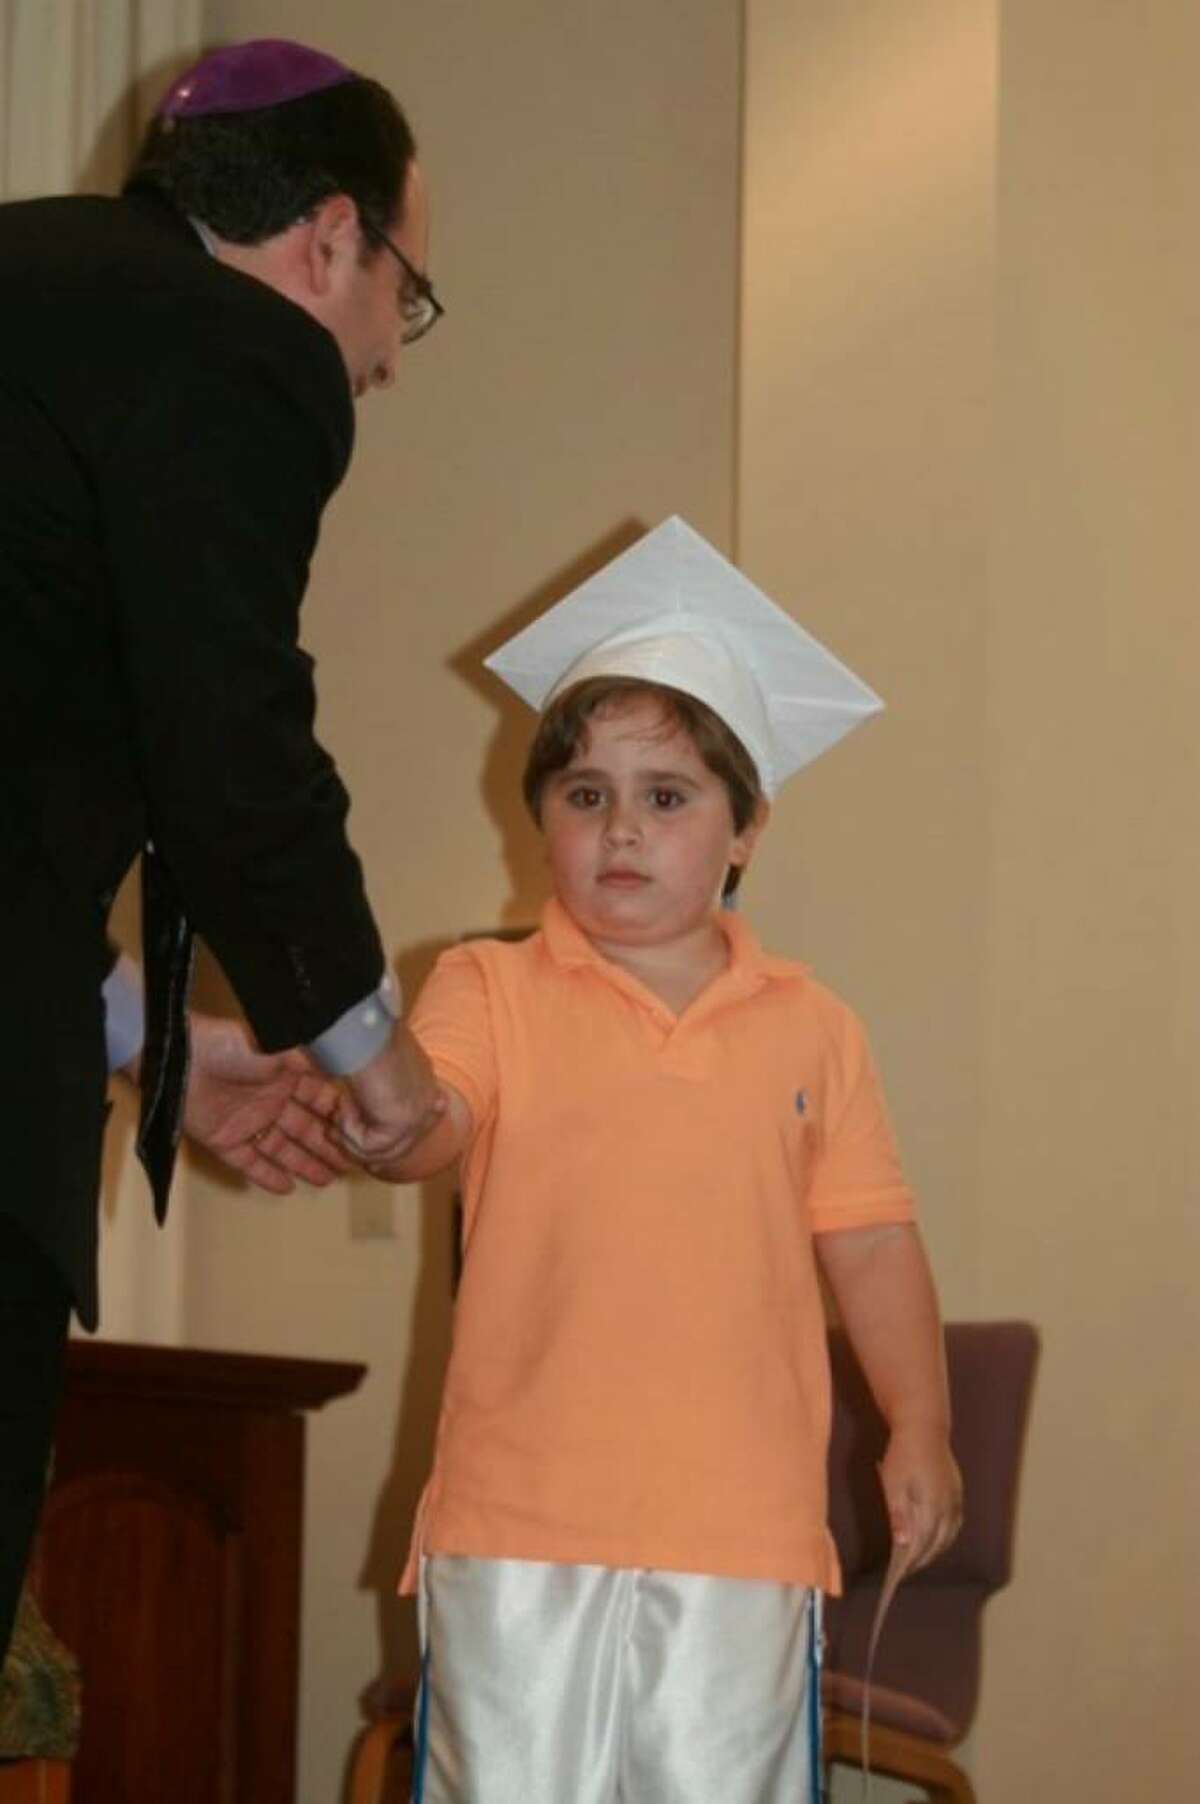 Rabbi Jeremy Wiederhorn of The Conservative Synagogue in Westport congratulates Ari Perkins of Westport as he graduates from the 4's program at the Synagogue's preschool.